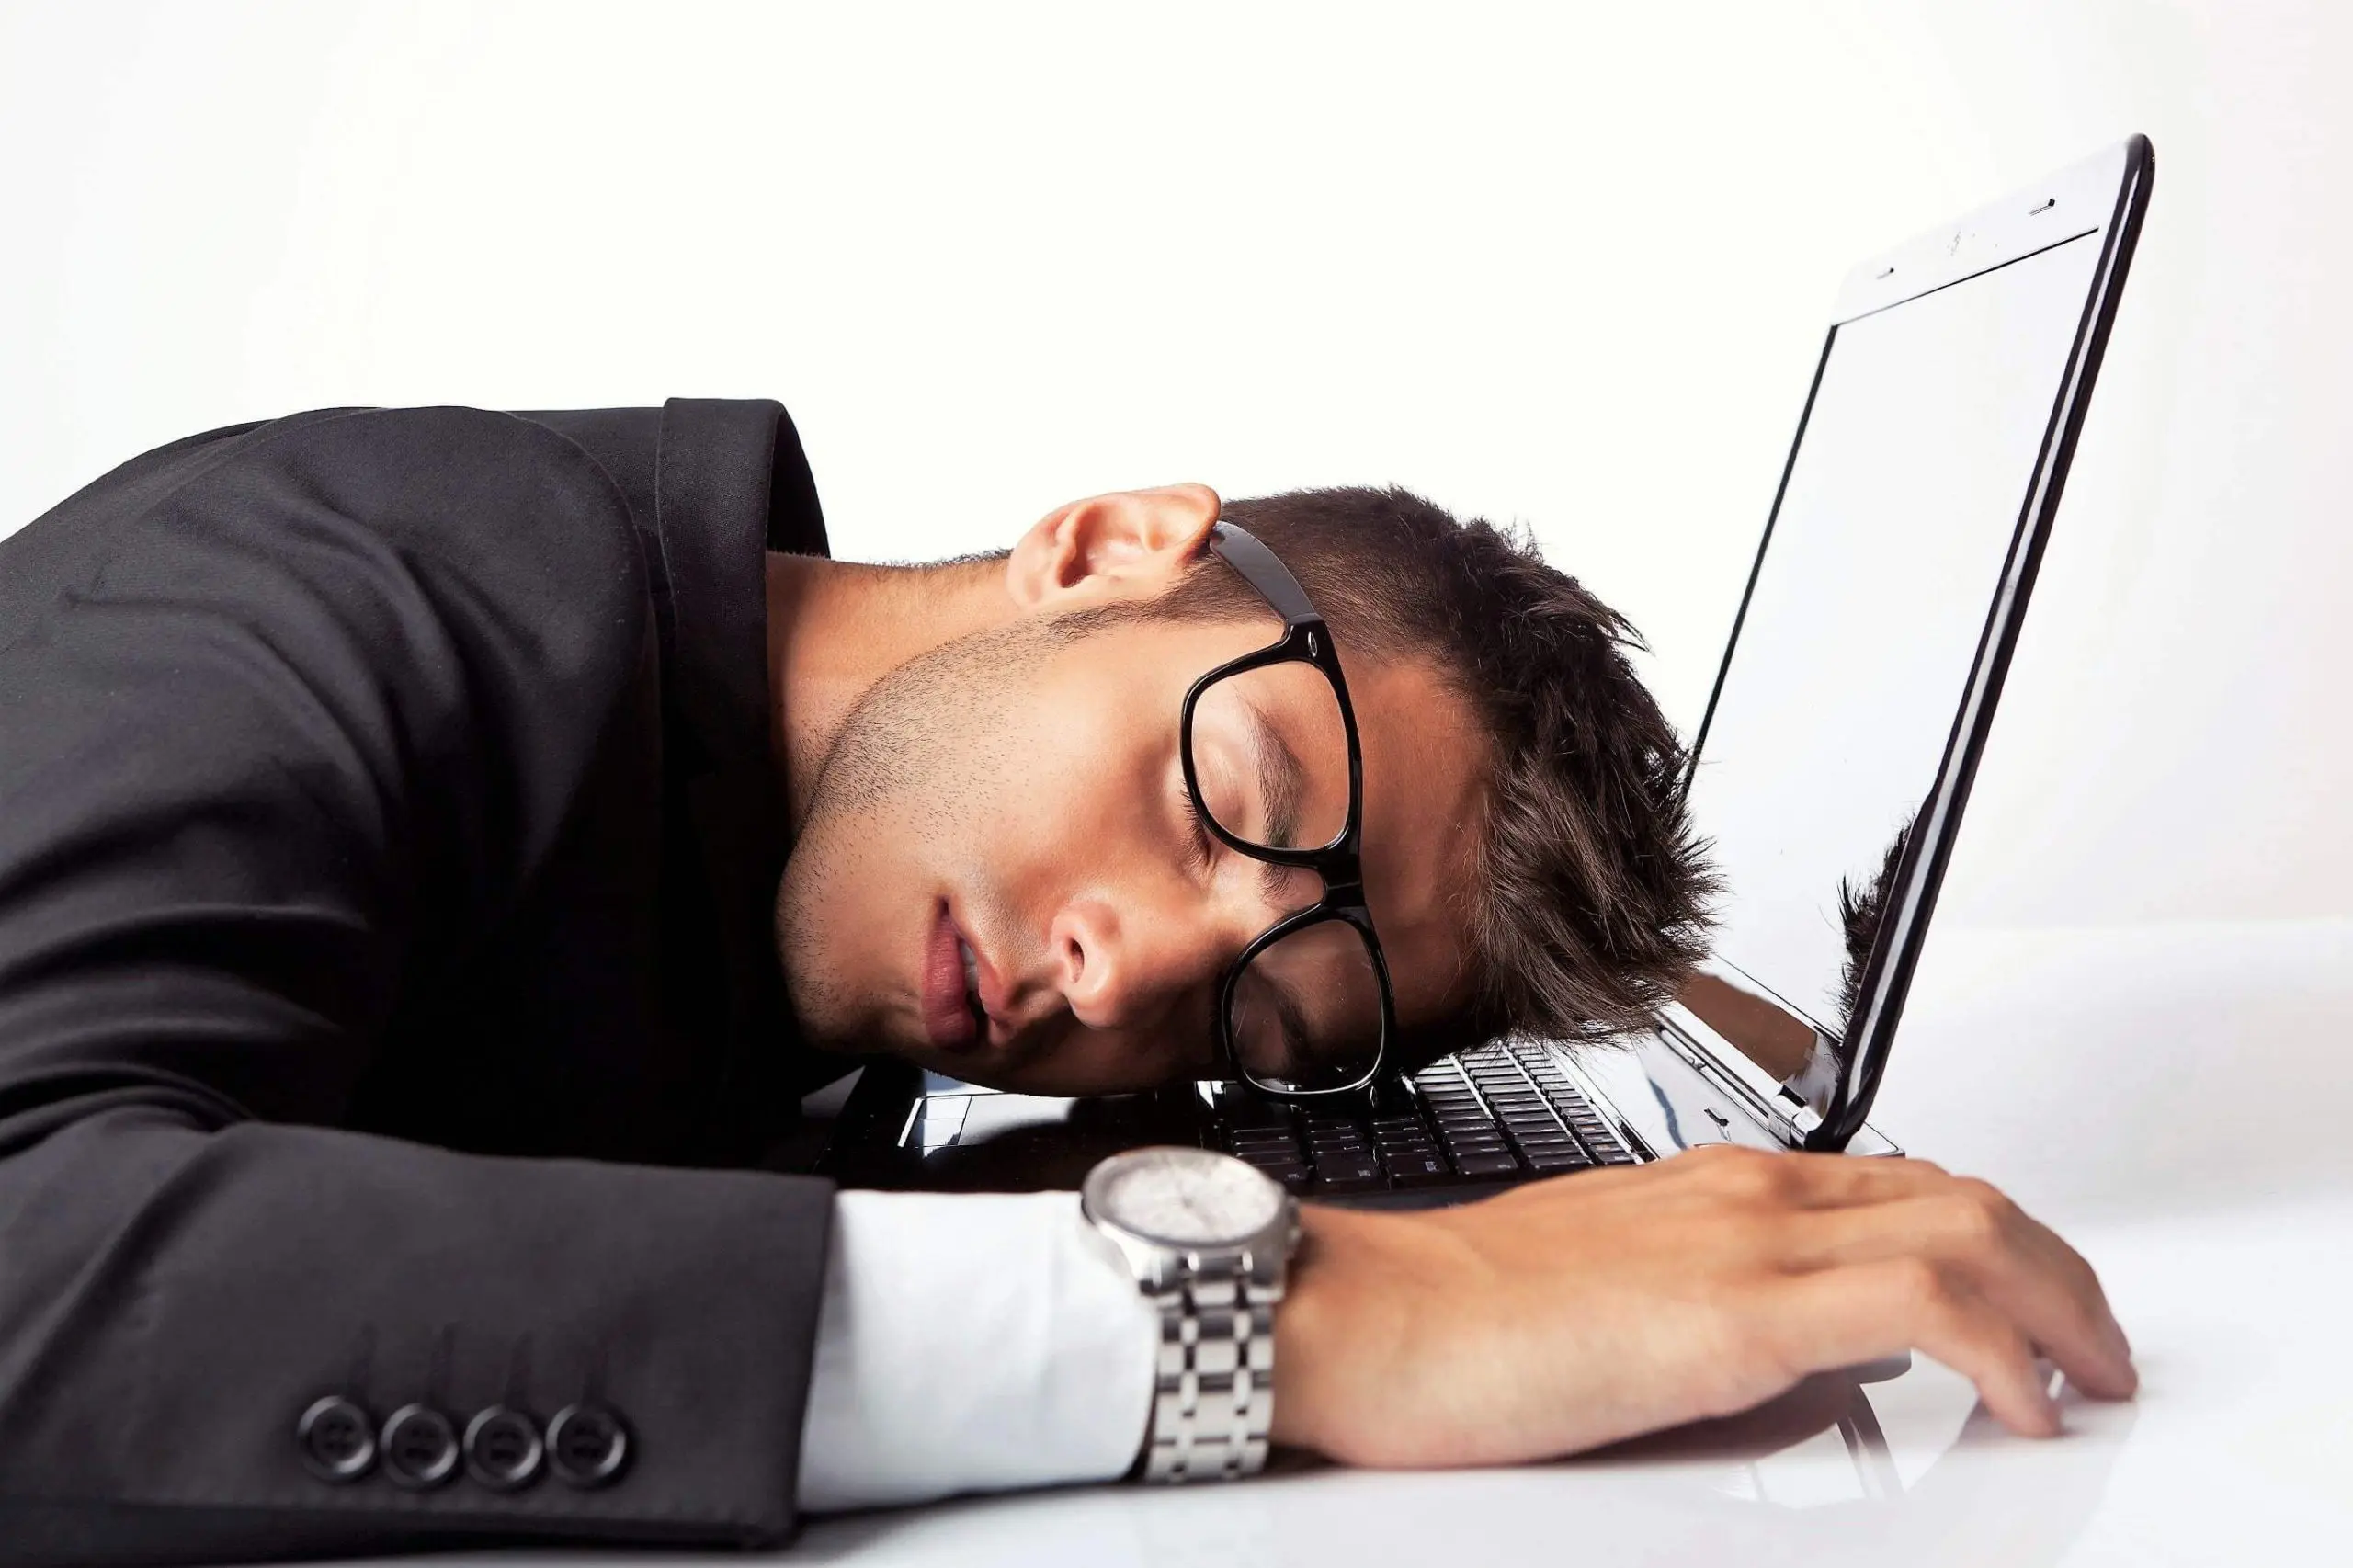 Always tired? The most common causes of fatigue & what to do about it